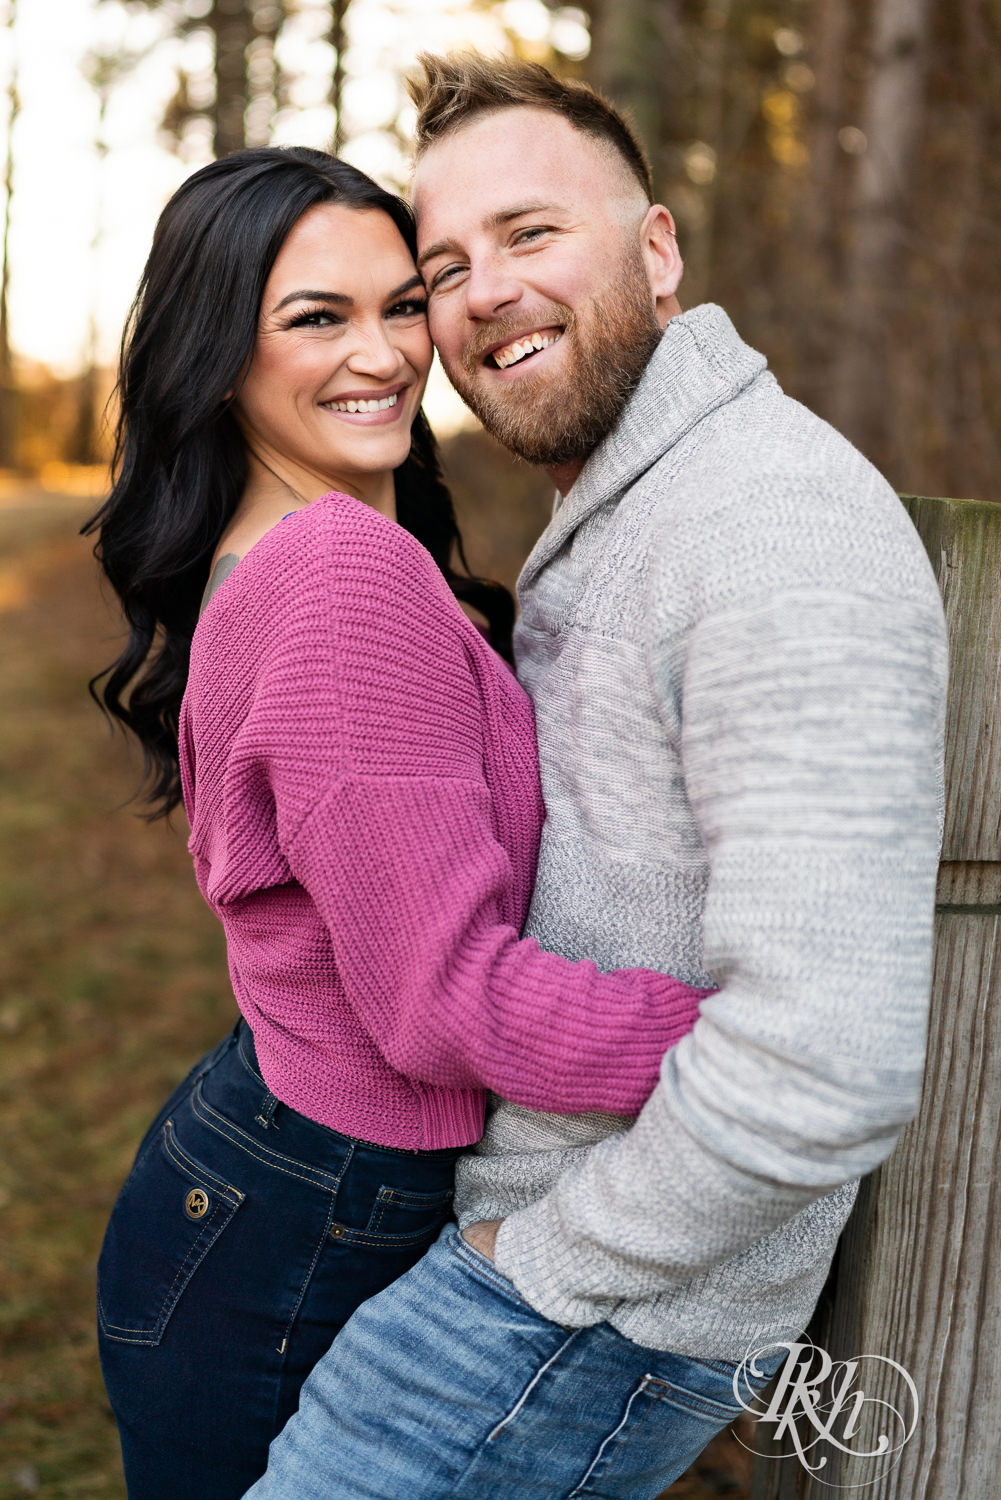 Man in sweater and jeans and woman in pink sweater and jeans smile at Lebanon Hills Regional Park in Eagan, Minnesota.